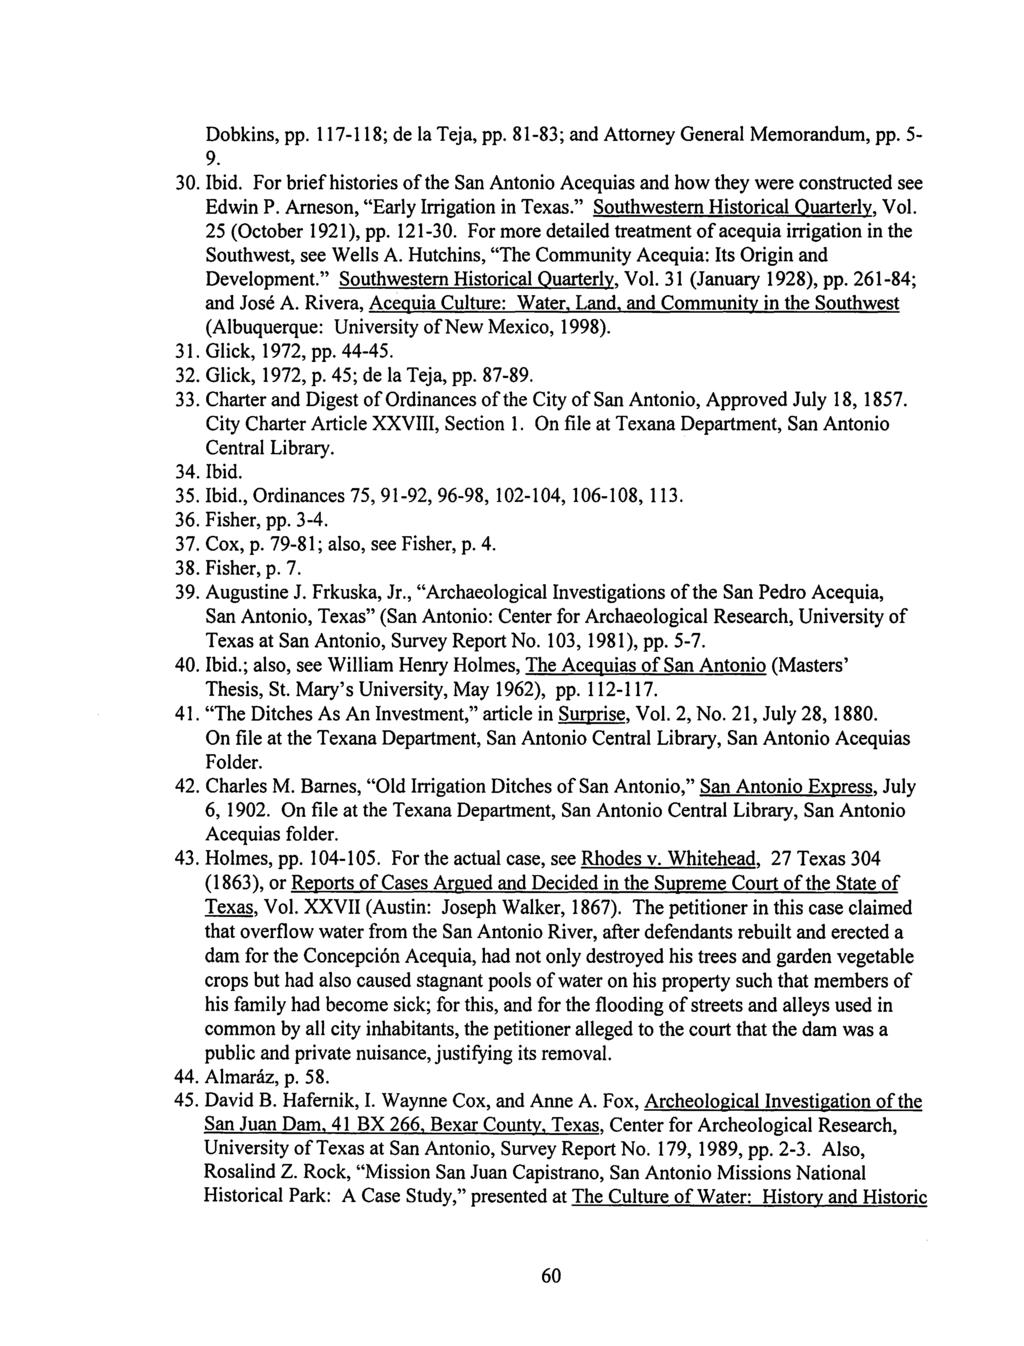 Dobkins, pp. 117-118; de la Teja, pp. 81-83; and Attorney General Memorandum, pp. 5-9. 30. Ibid. For brief histories of the San Antonio Acequias and how they were constructed see Edwin P.